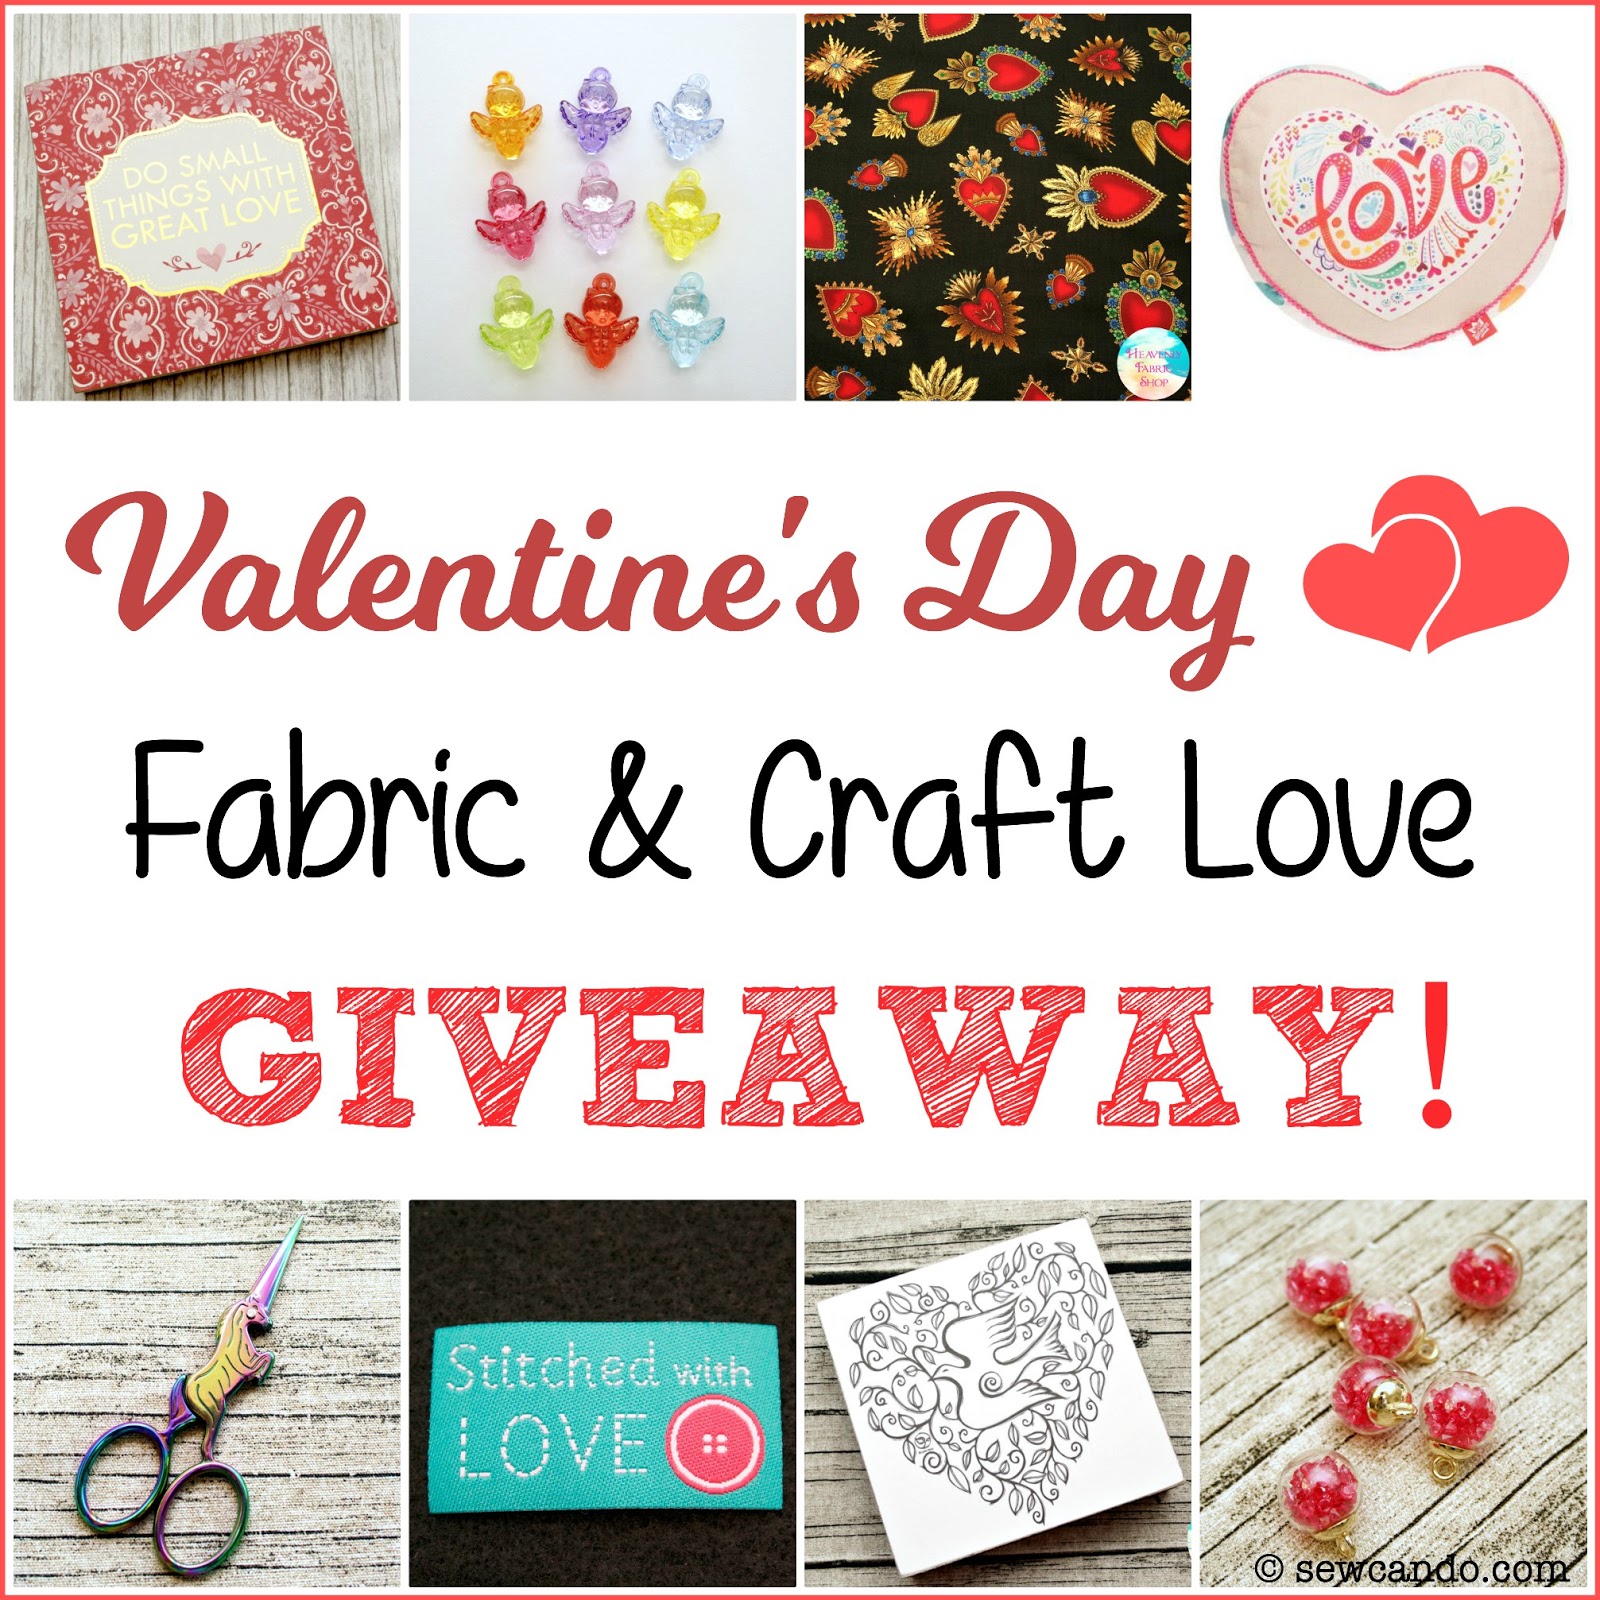 Sew Can Do Valentine's Day Fabric & Craft Love Giveaway!